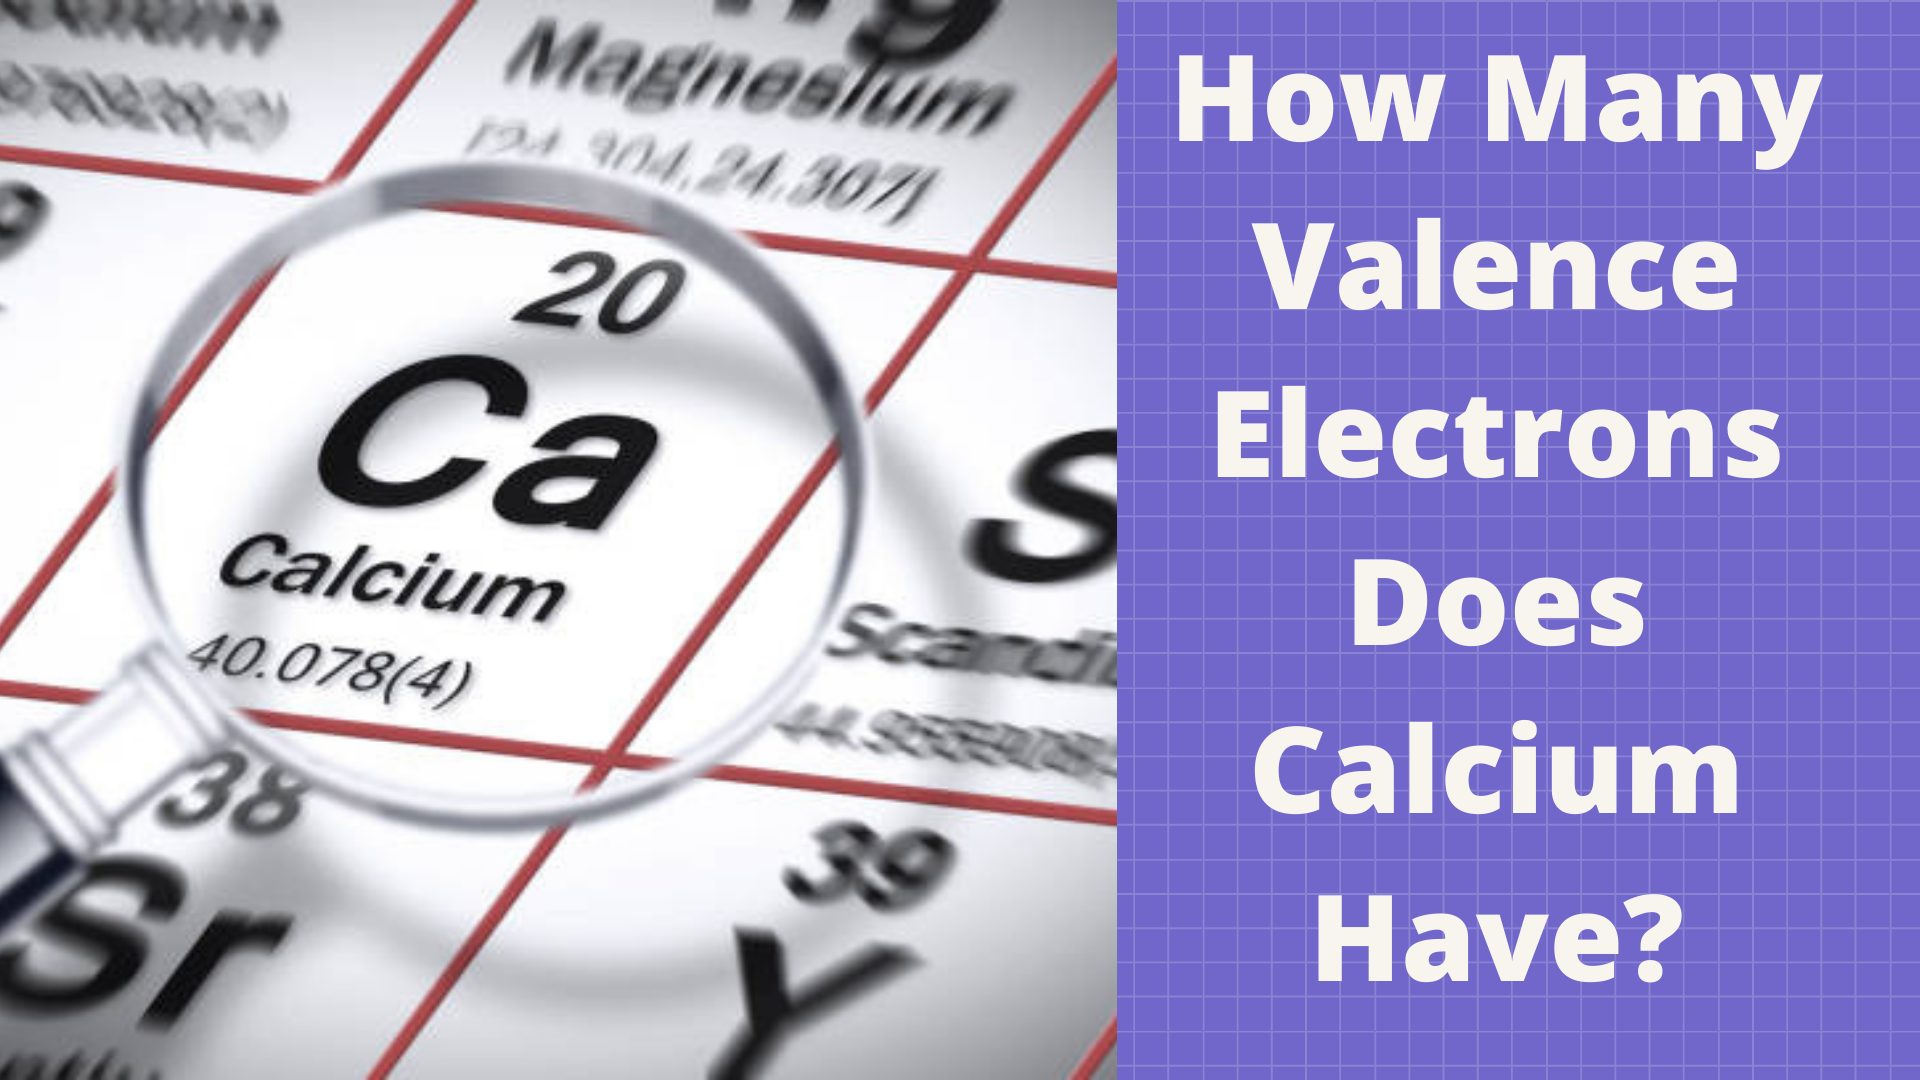 How Many Valence Electrons Does Calcium Have